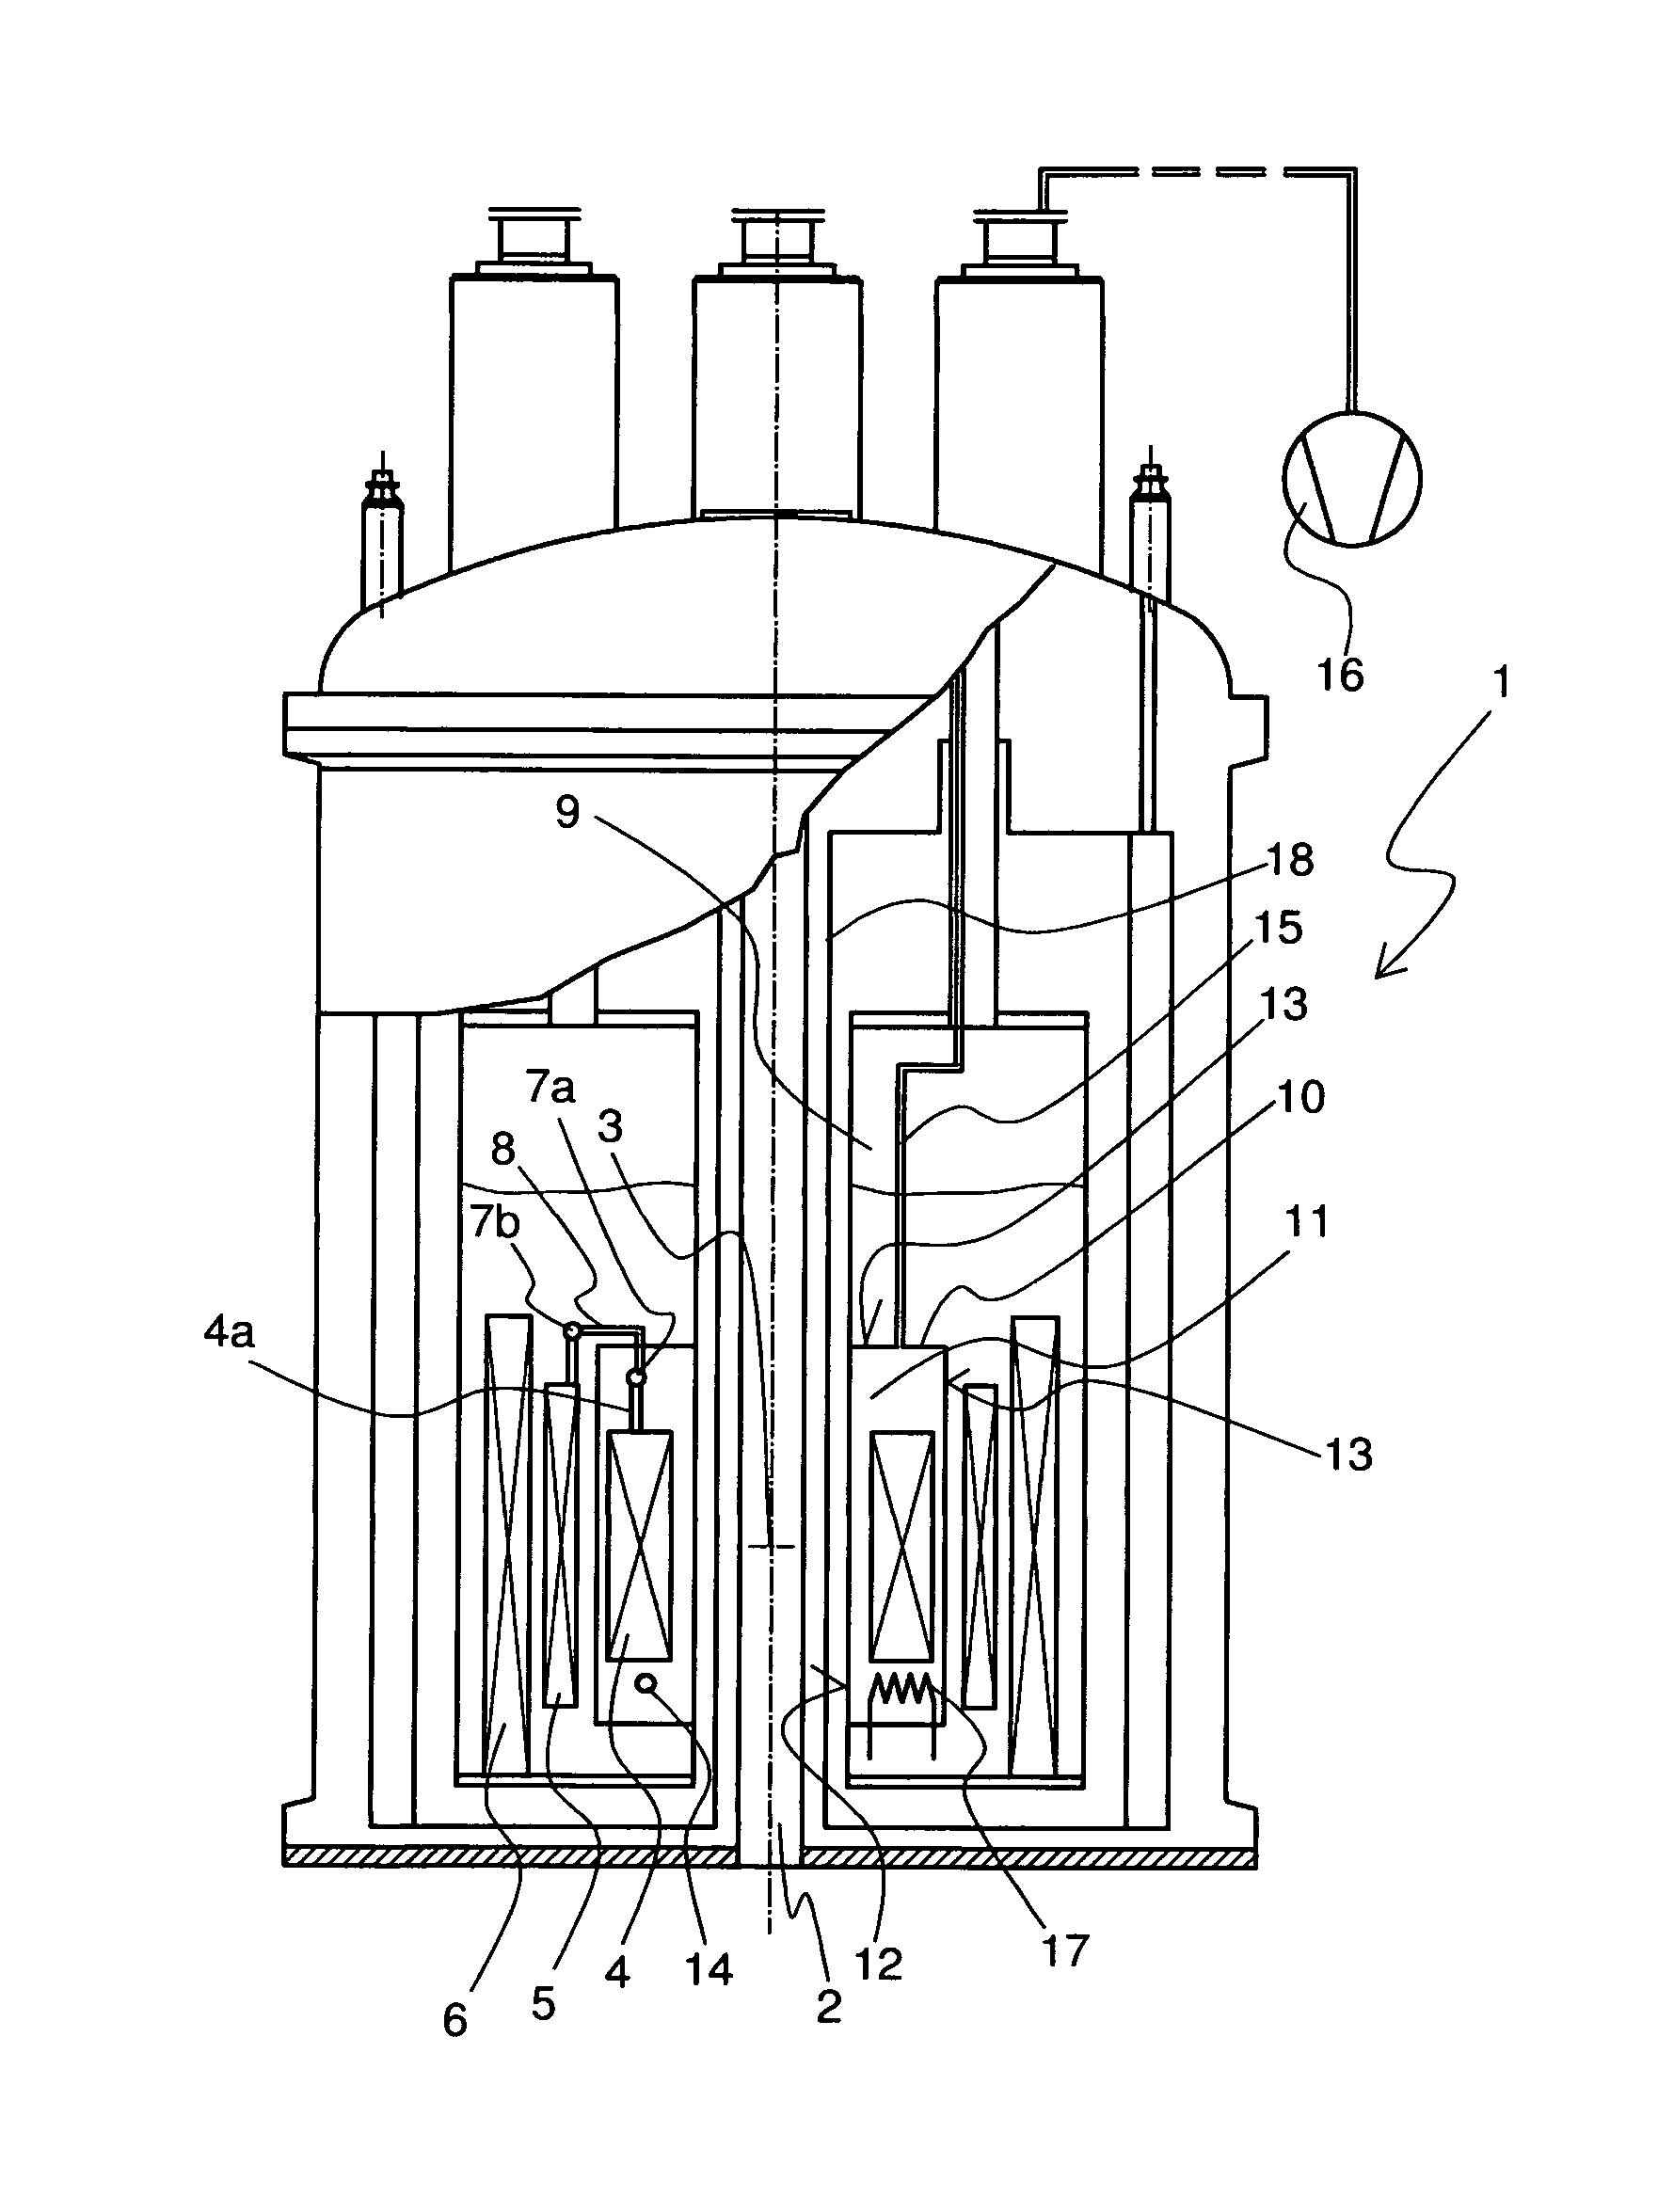 Cryostat having a magnet coil system, which comprises an LTS section and an encapsulated HTS section